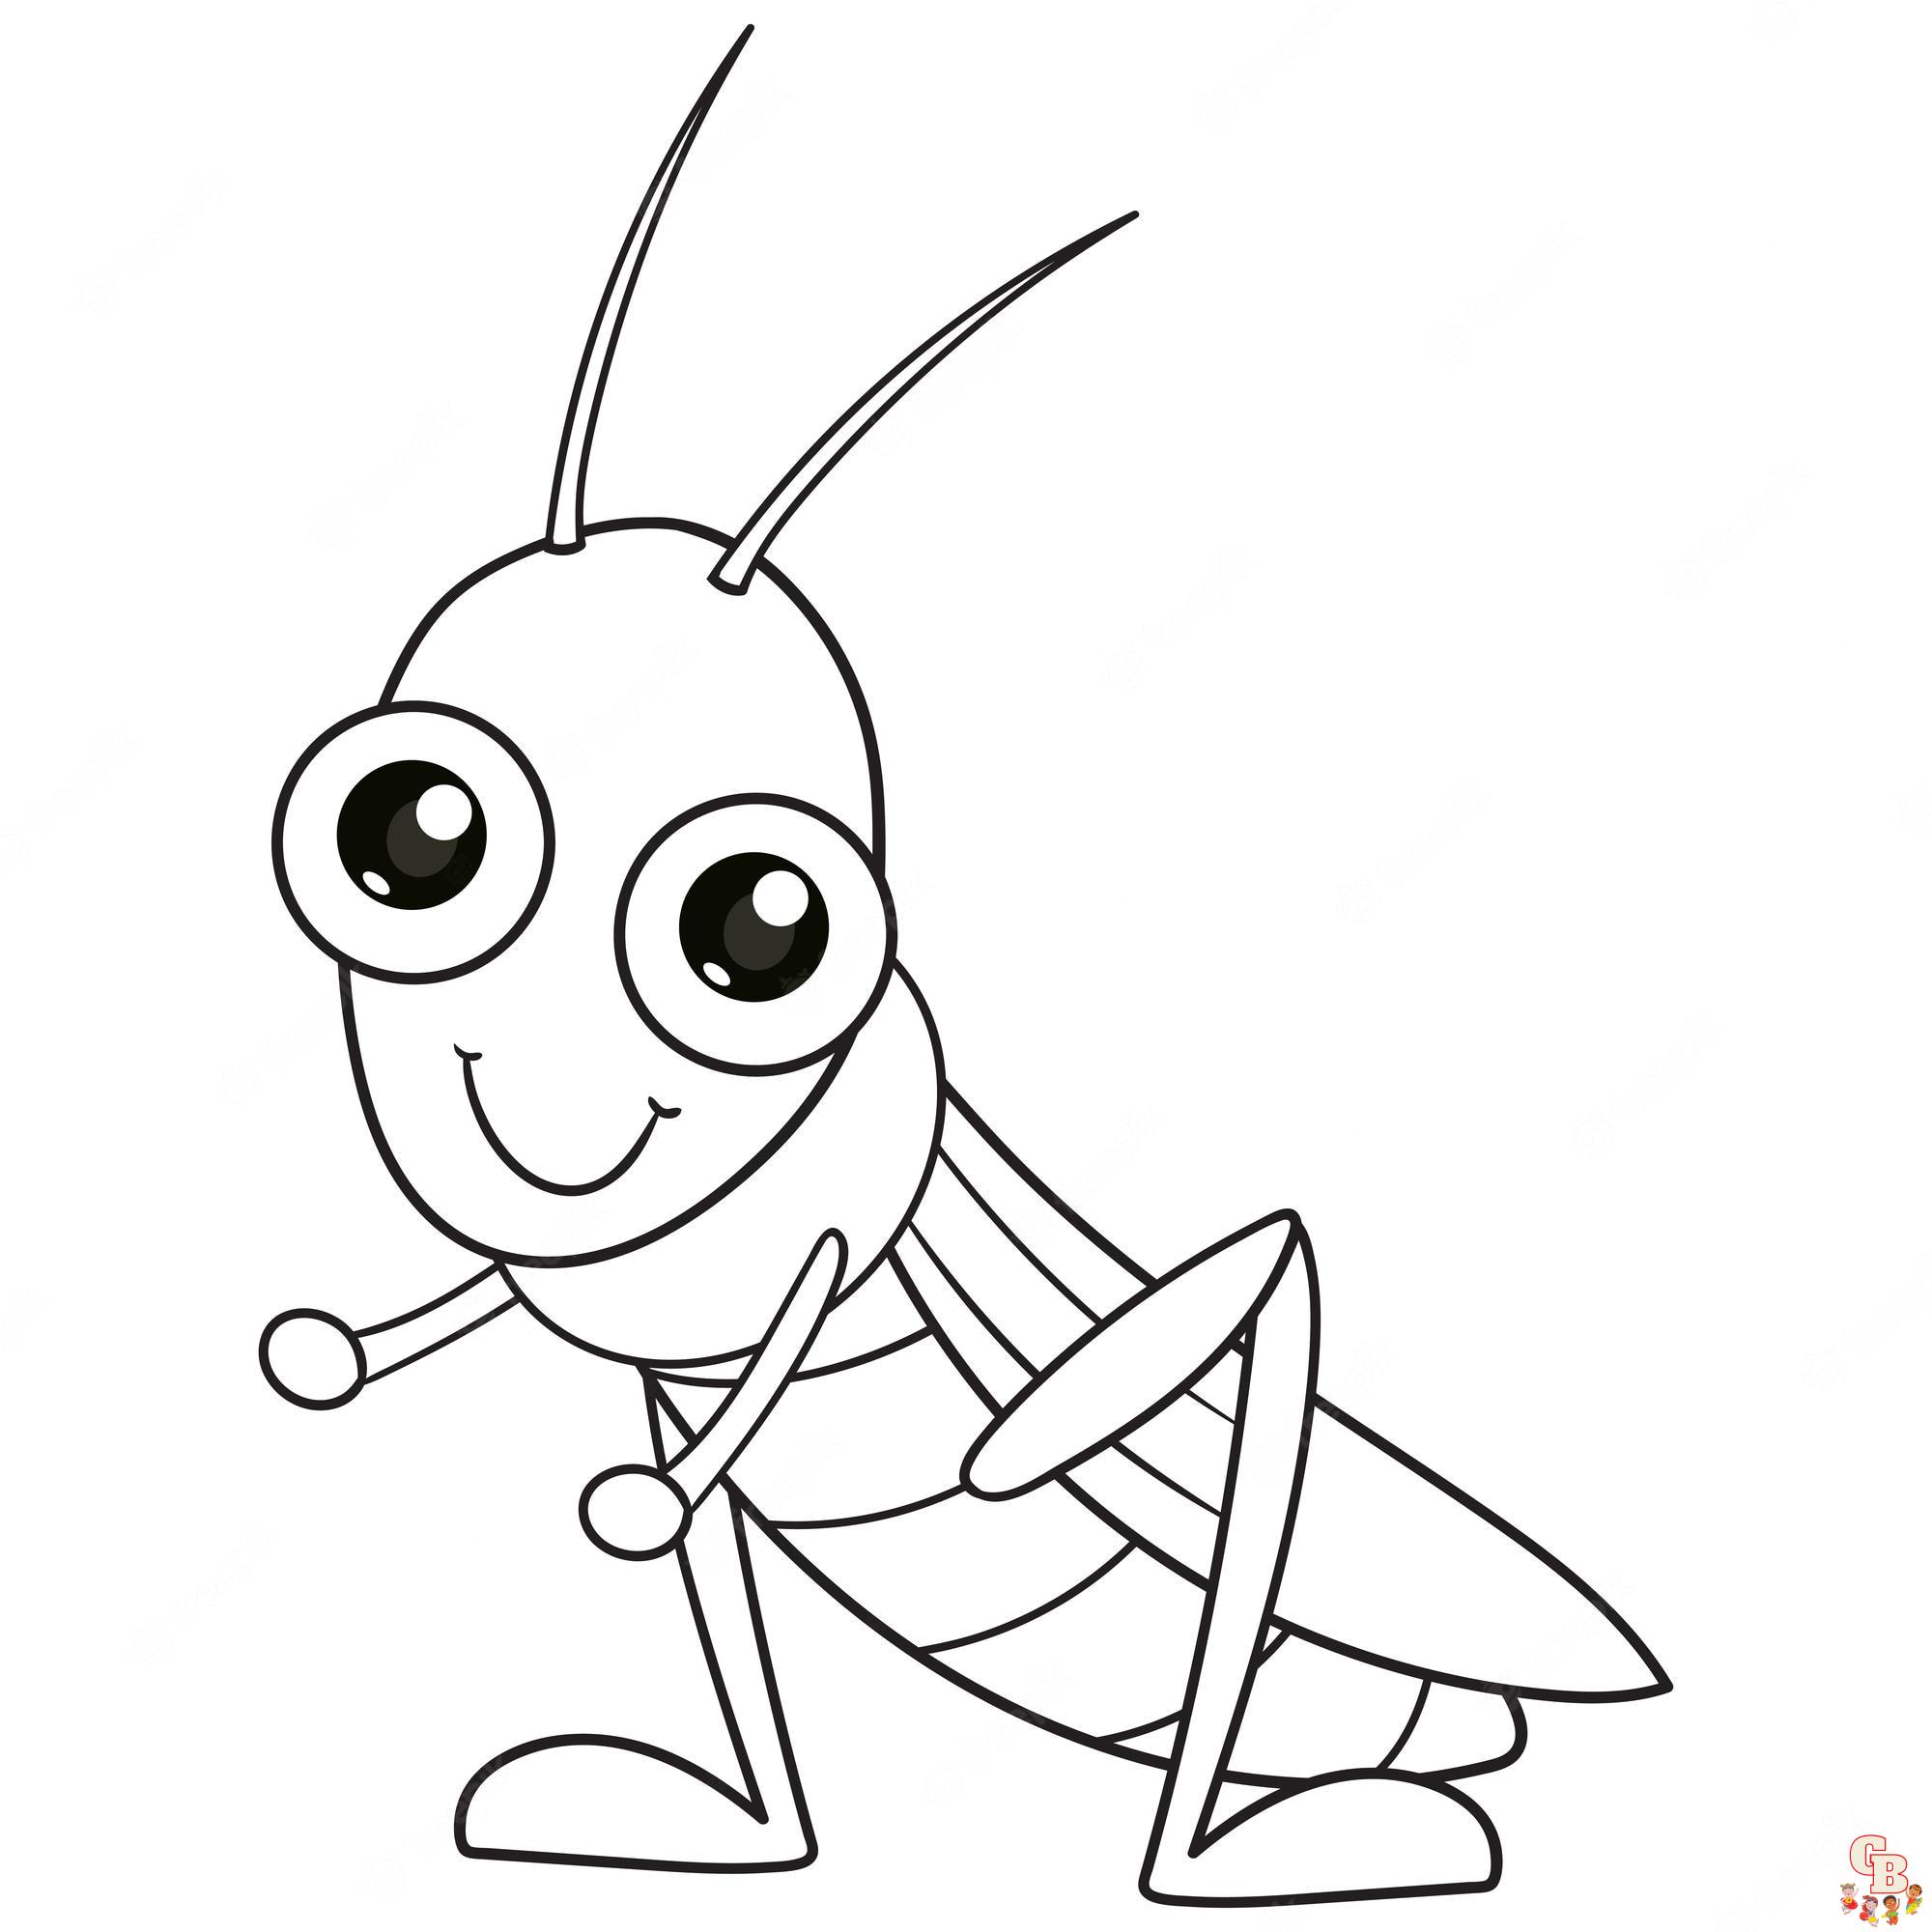 Grasshopper Coloring Pages 3